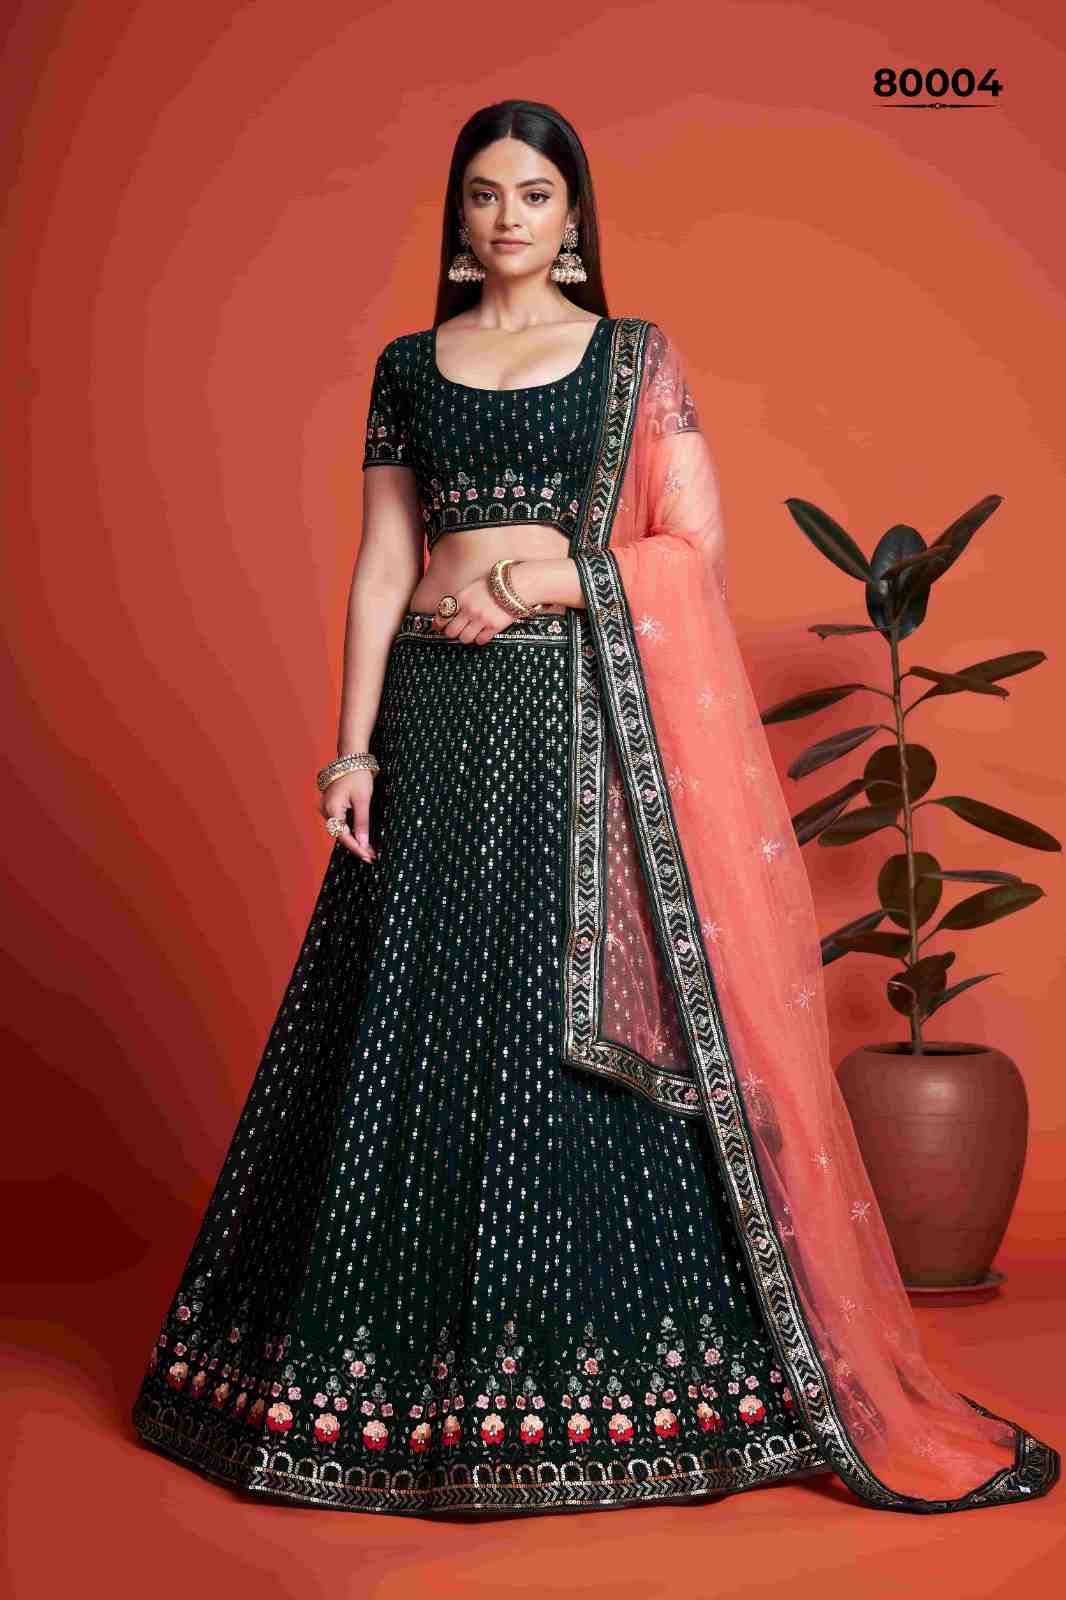 Arya Vol-50 By Arya Designs 80001 To 80014 Series Designer Beautiful Wedding Collection Occasional Wear & Party Wear Georgette Lehengas At Wholesale Price